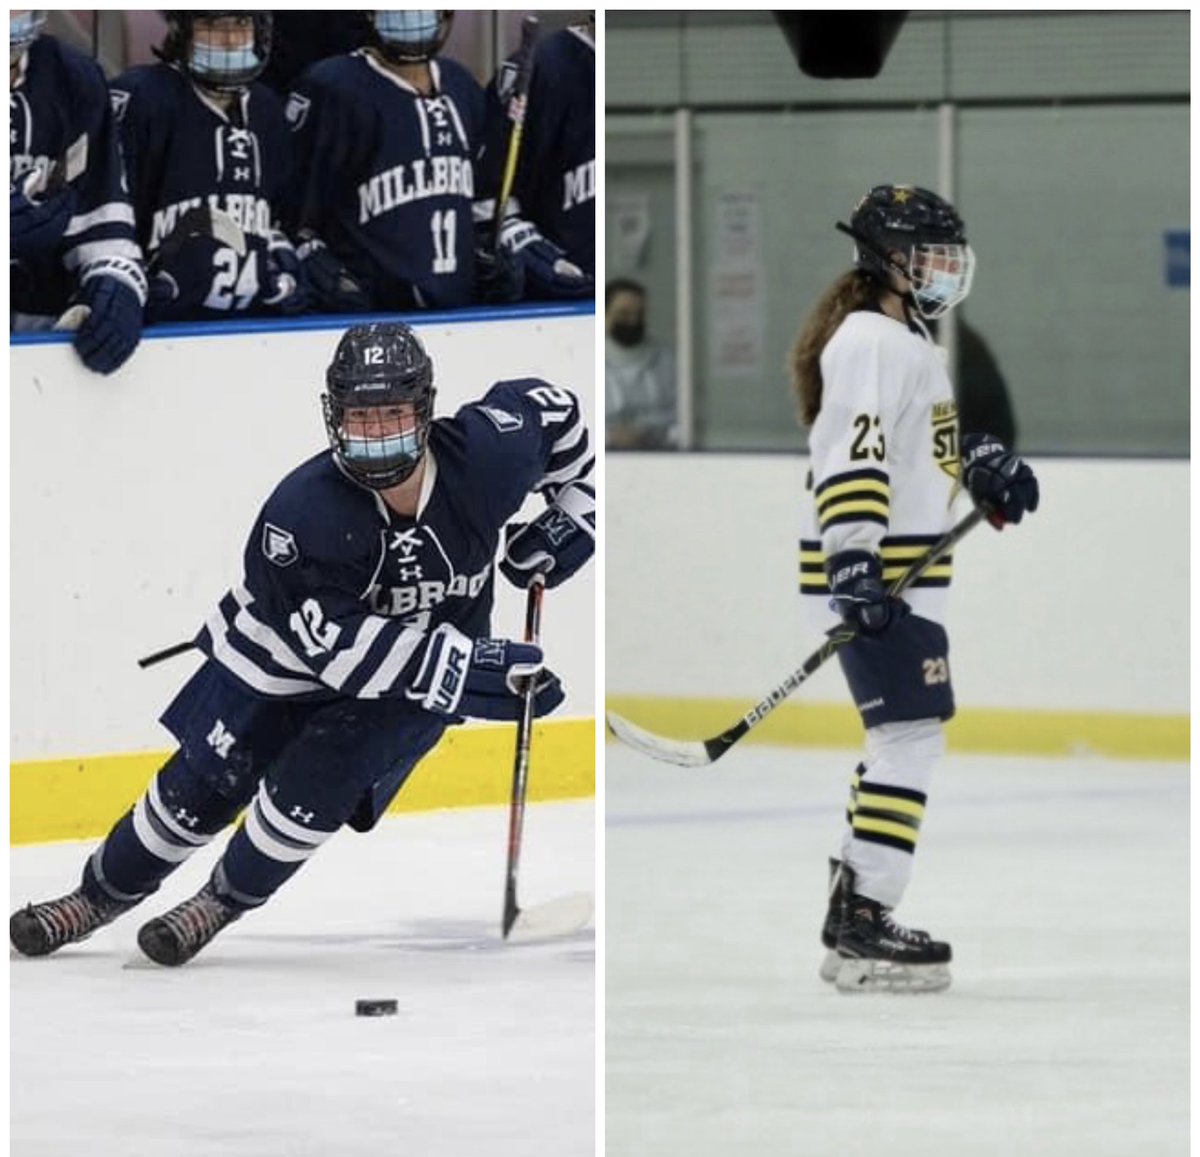 Congratulations to rising sophomore, Caleigh Murphy ‘24 (left) and incoming freshman, Emily Morin ‘25 (right) for earning a spot at @usahockey National Camp this summer in Minnesota! Way to represent! @millbrkmustangs